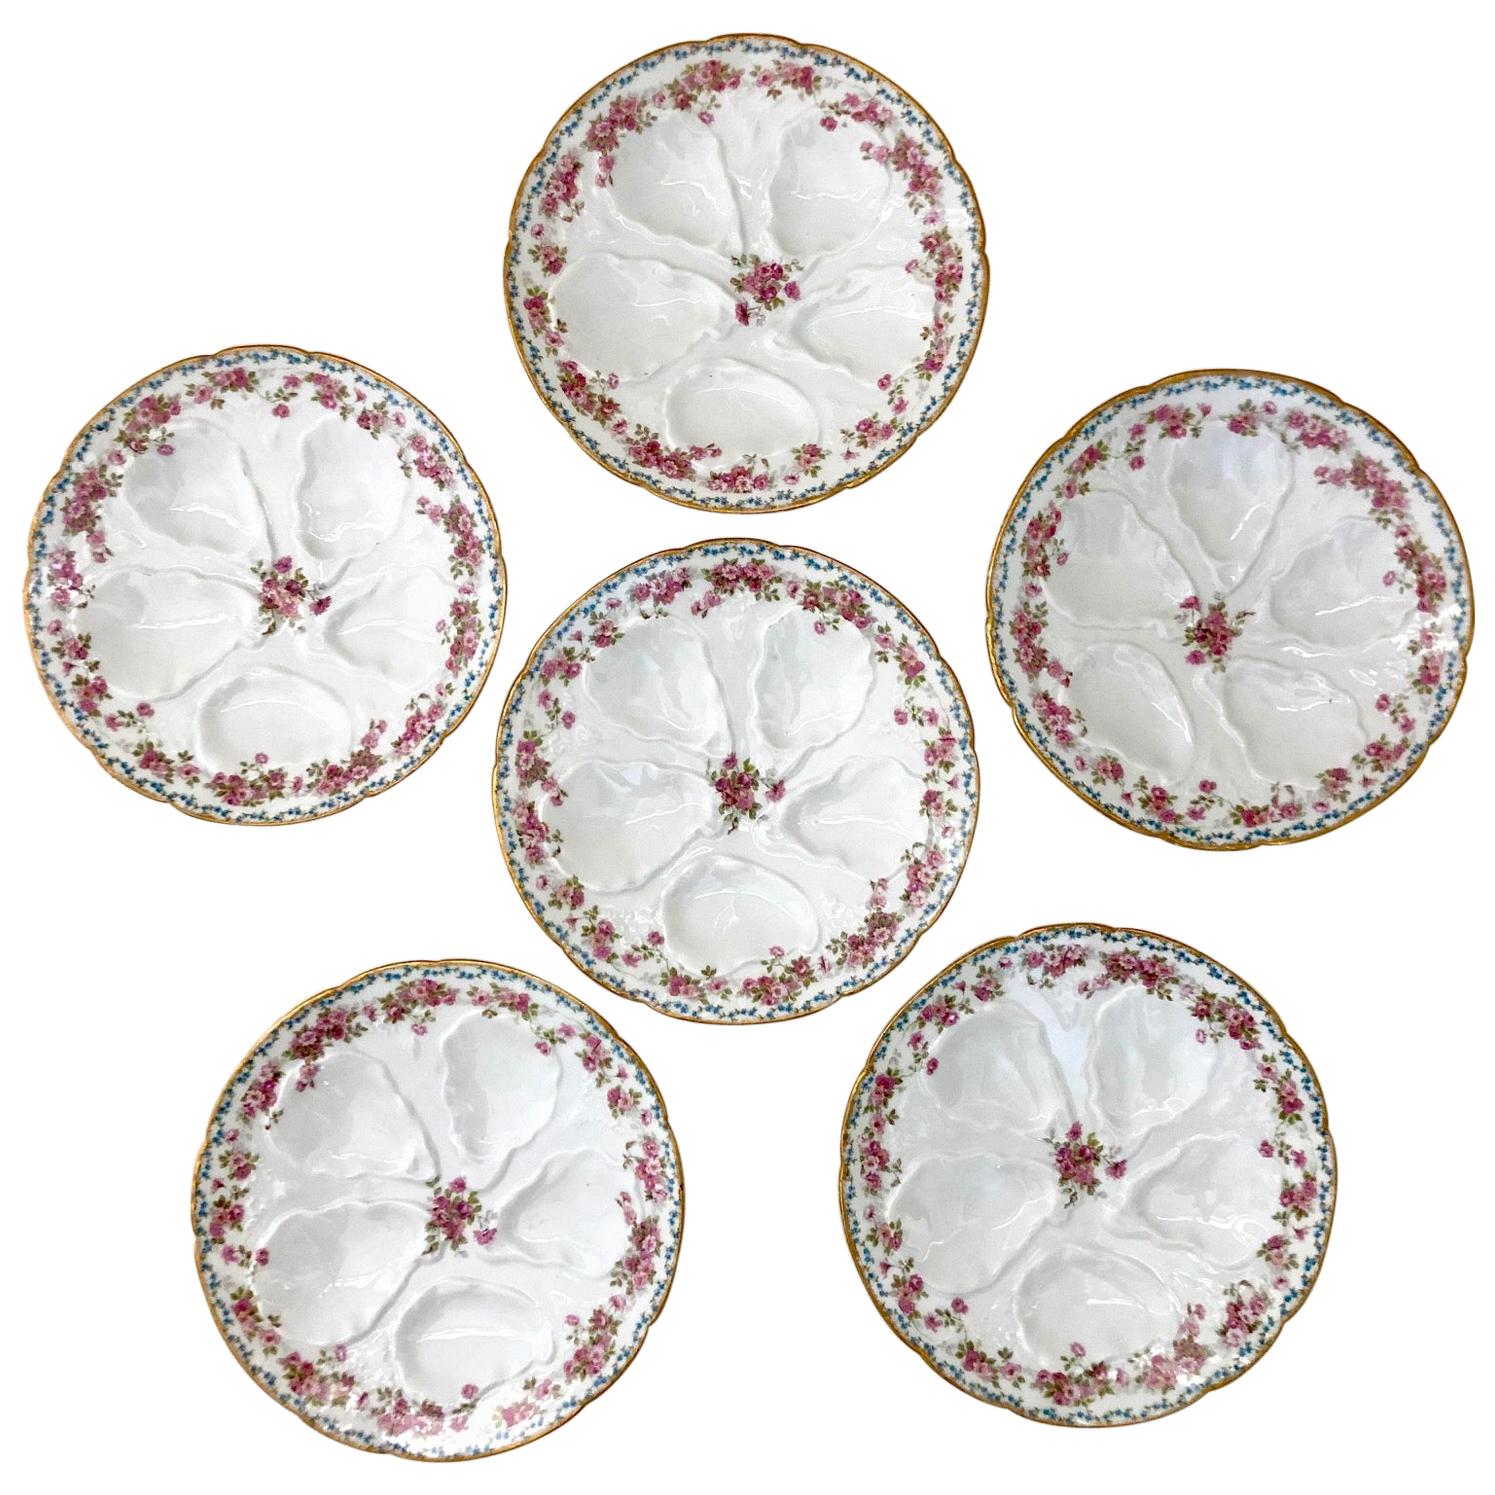 Immaculate Set of Six French Limoges Oyster Plates